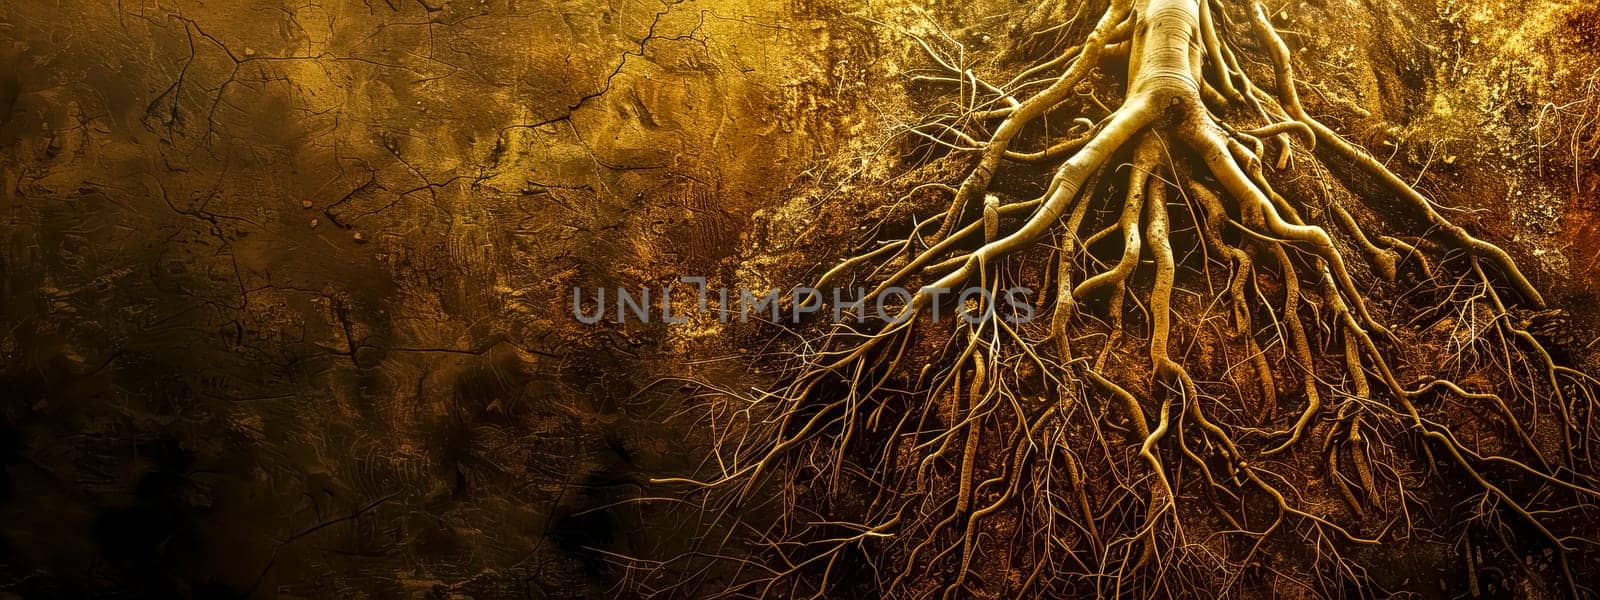 Detailed view of ancient tree roots sprawling across a parched, cracked soil background